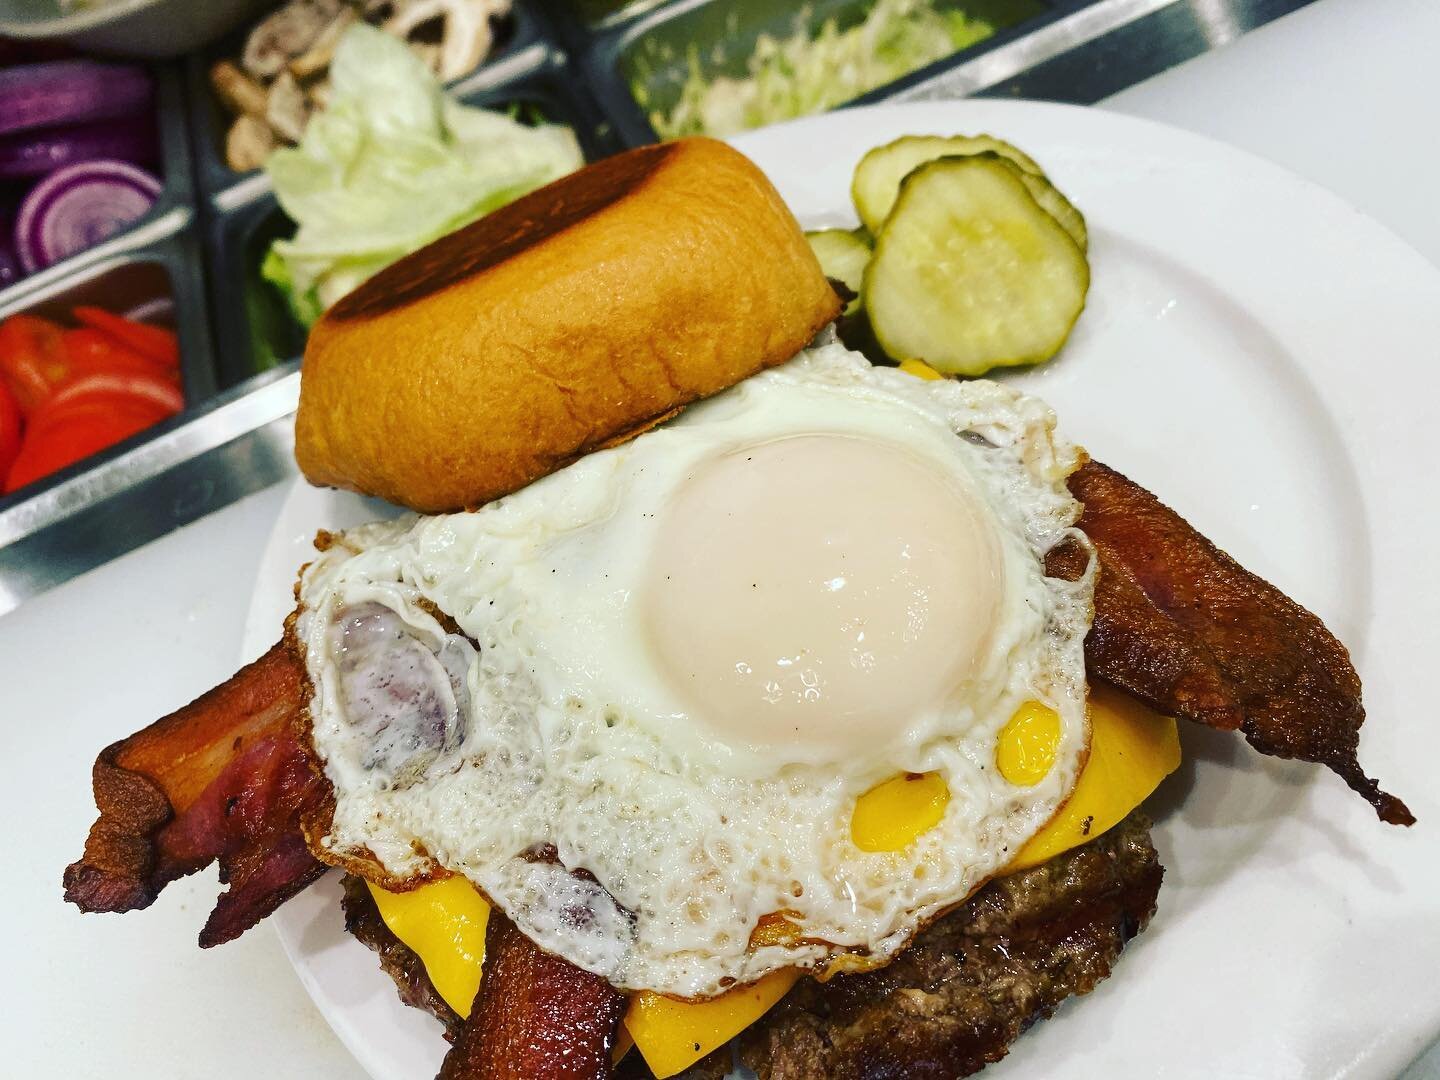 BREAKFAST IS BACK BABY!
Starting this week, weekend breakfast is back! We&rsquo;ve missed you, come in this Saturday-come from breakfast, stay for the BBQ!